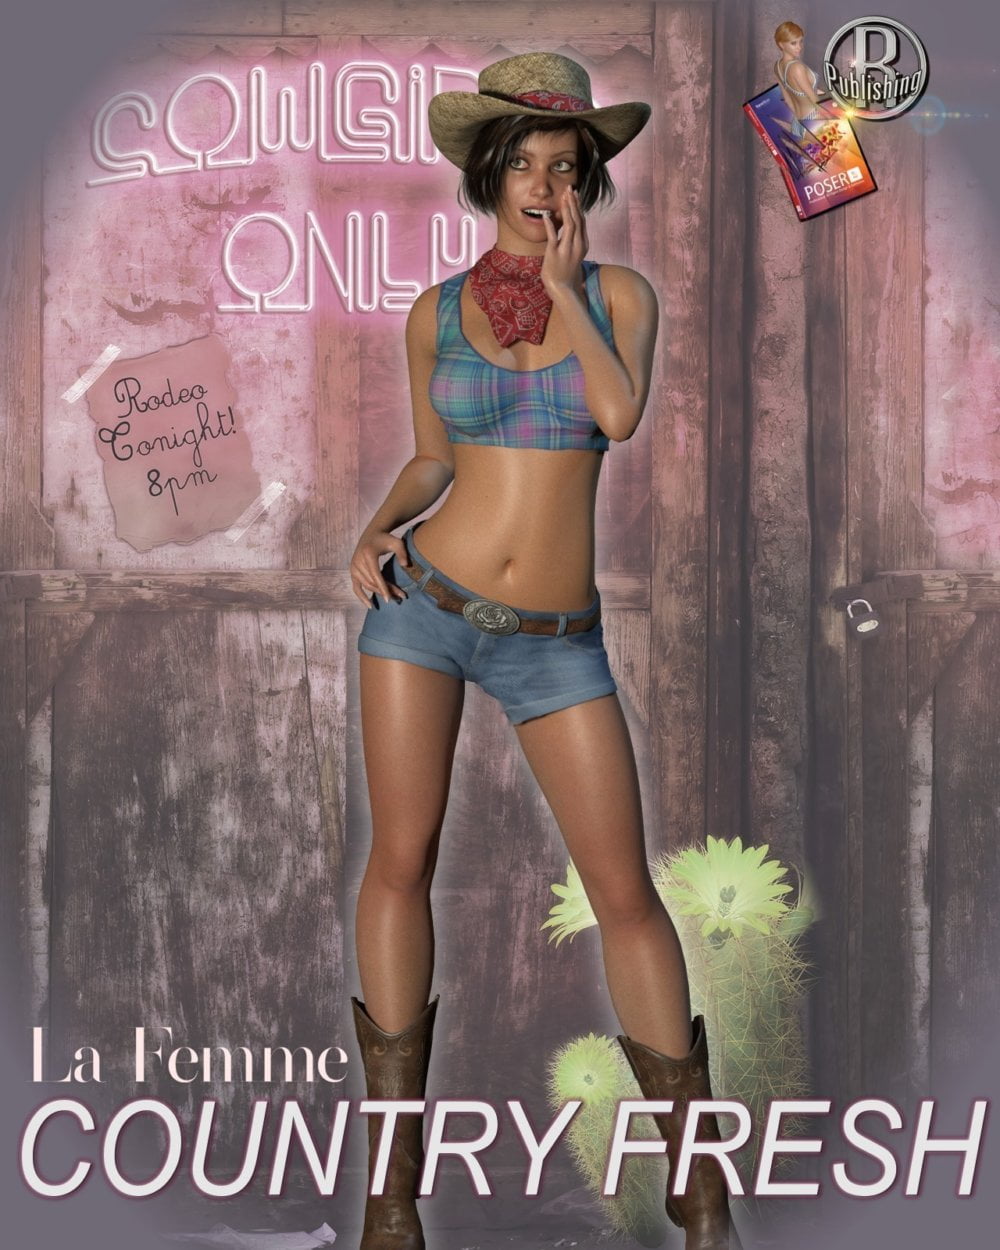 Country Fresh Clothing for La Femme and Poser 11